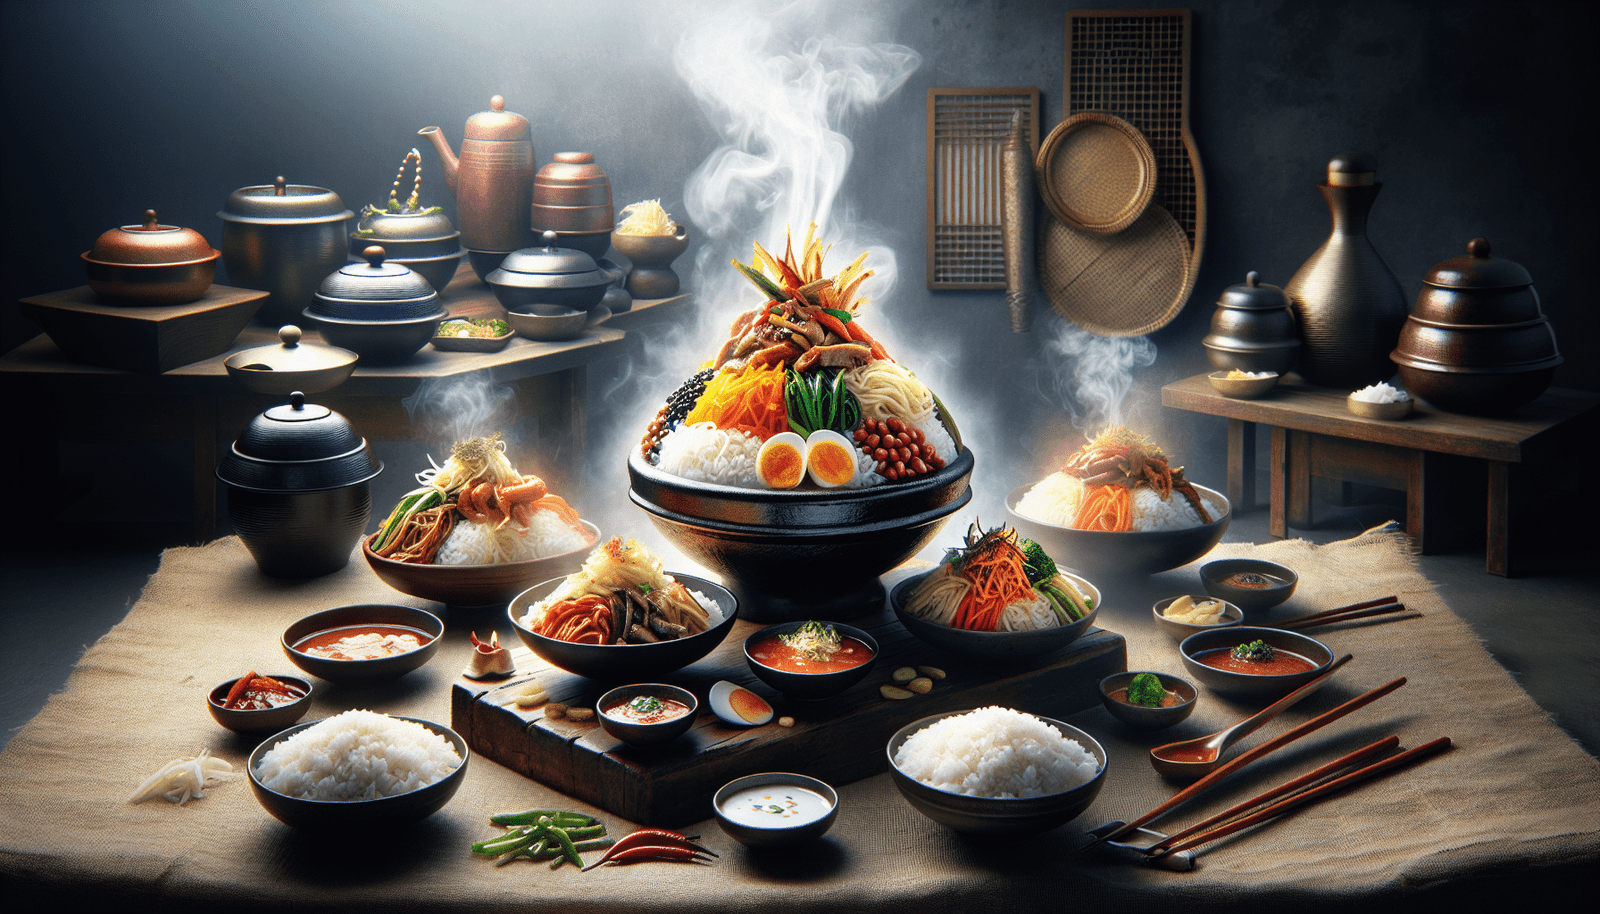 What Are The Different Types Of Traditional Korean Rice Dishes And Their Variations?